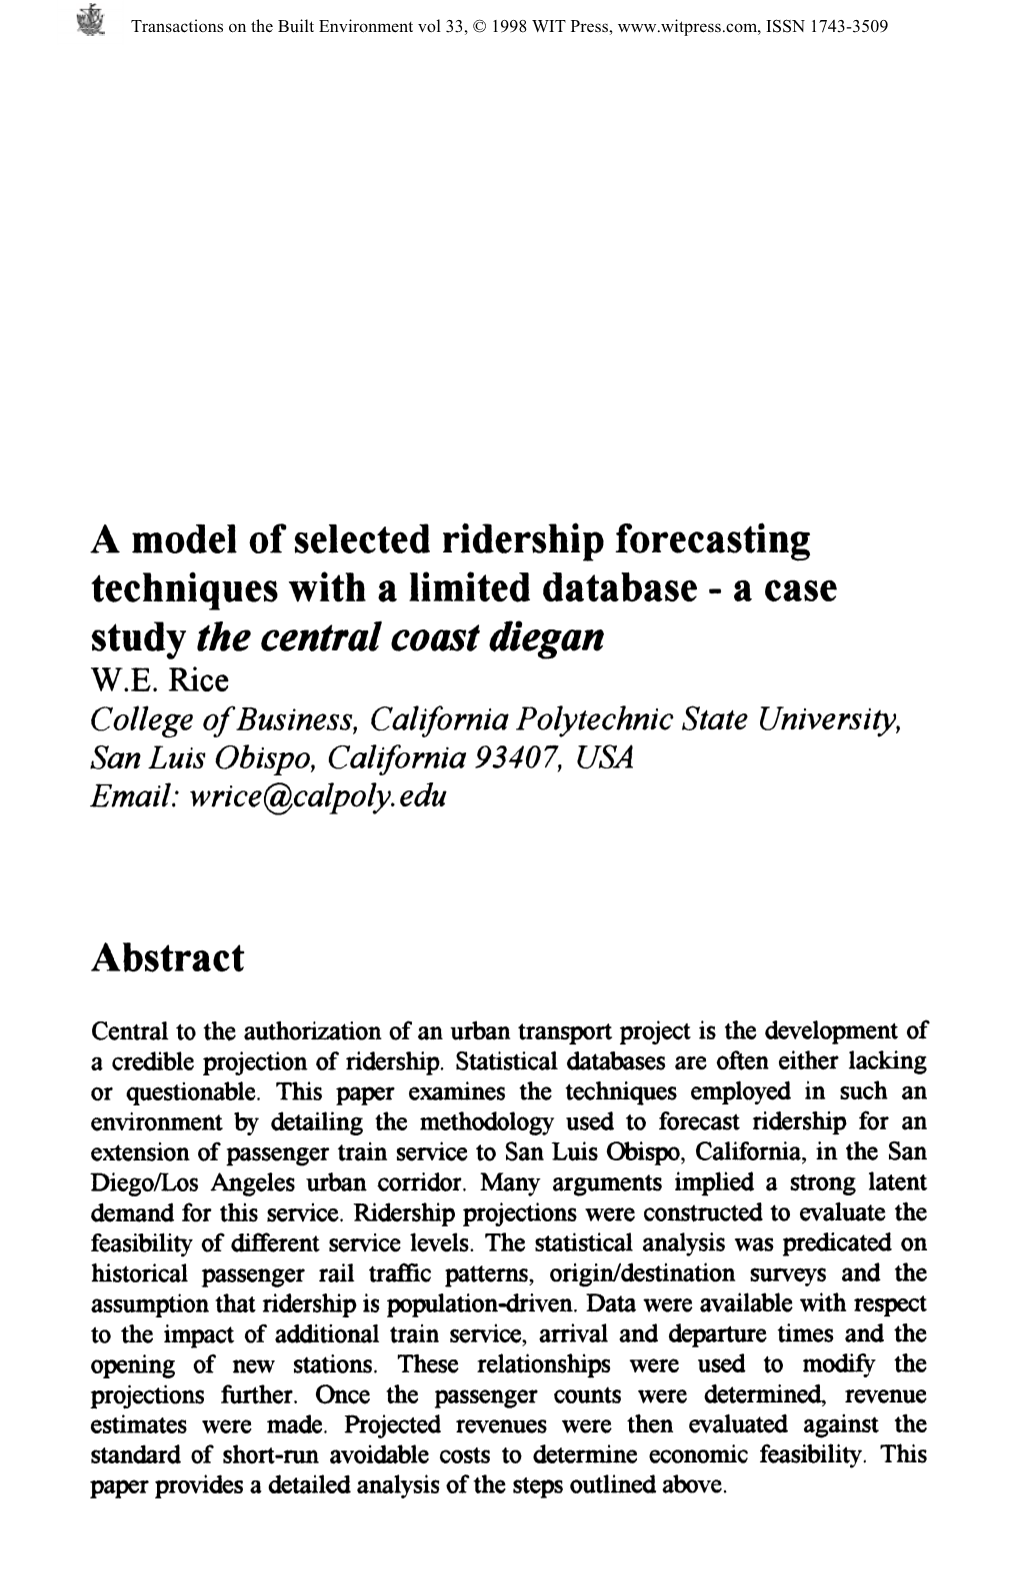 A Model of Selected Ridership Forecasting Techniques with a Limited Database - a Case Study the Central Coast Diegan W.E